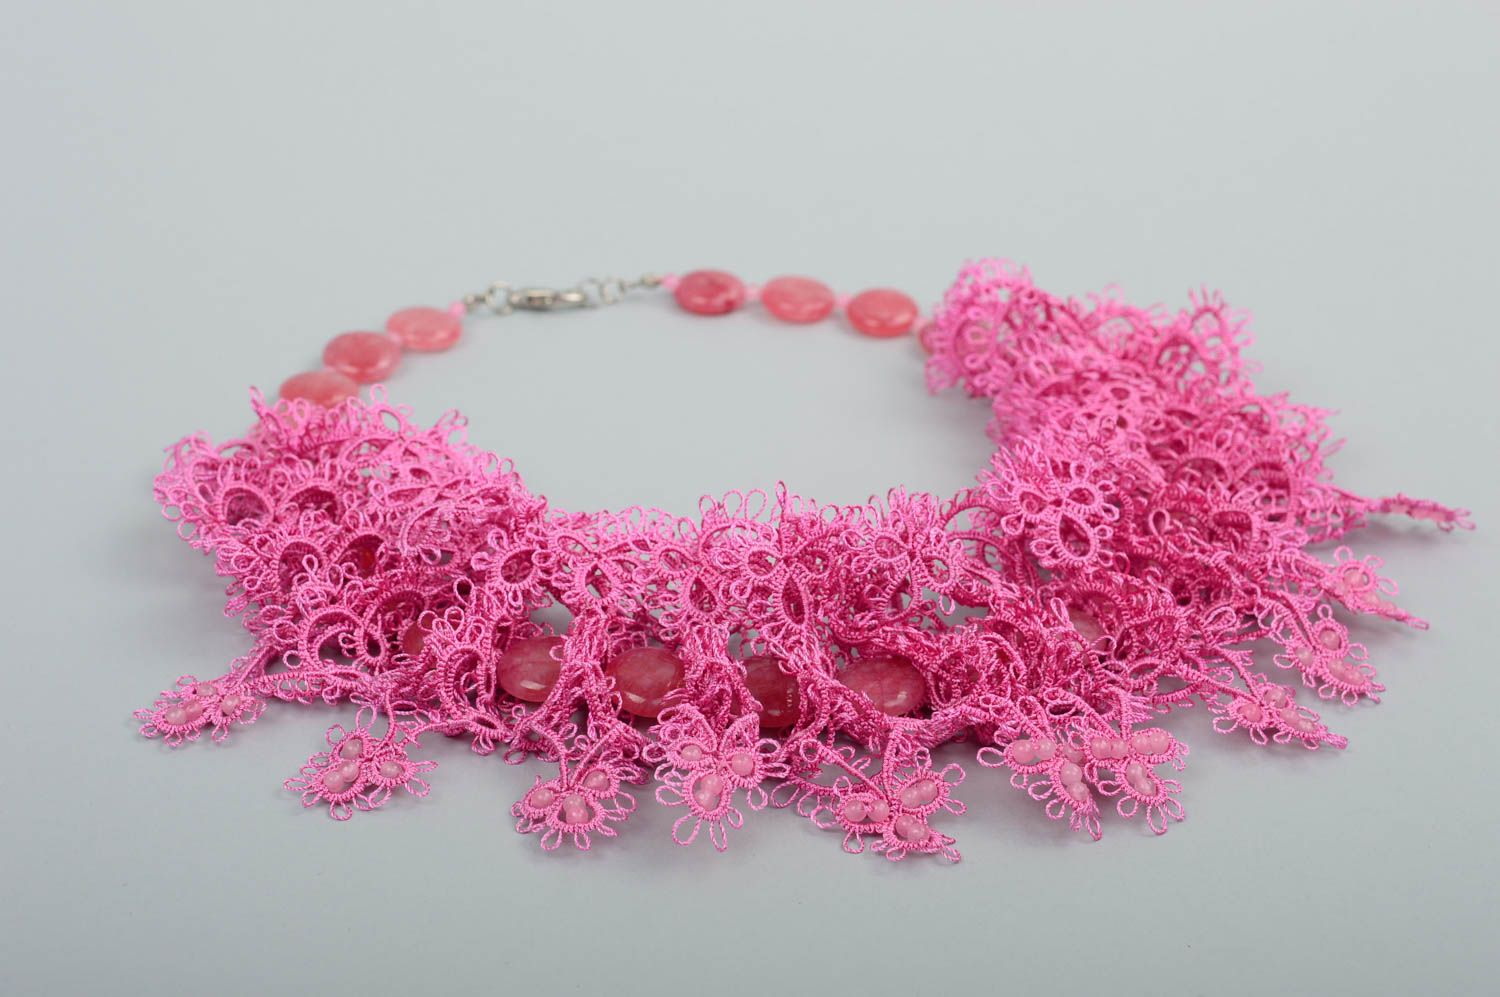 Unusual handmade gemstone necklace woven lace necklace textile jewelry designs photo 2